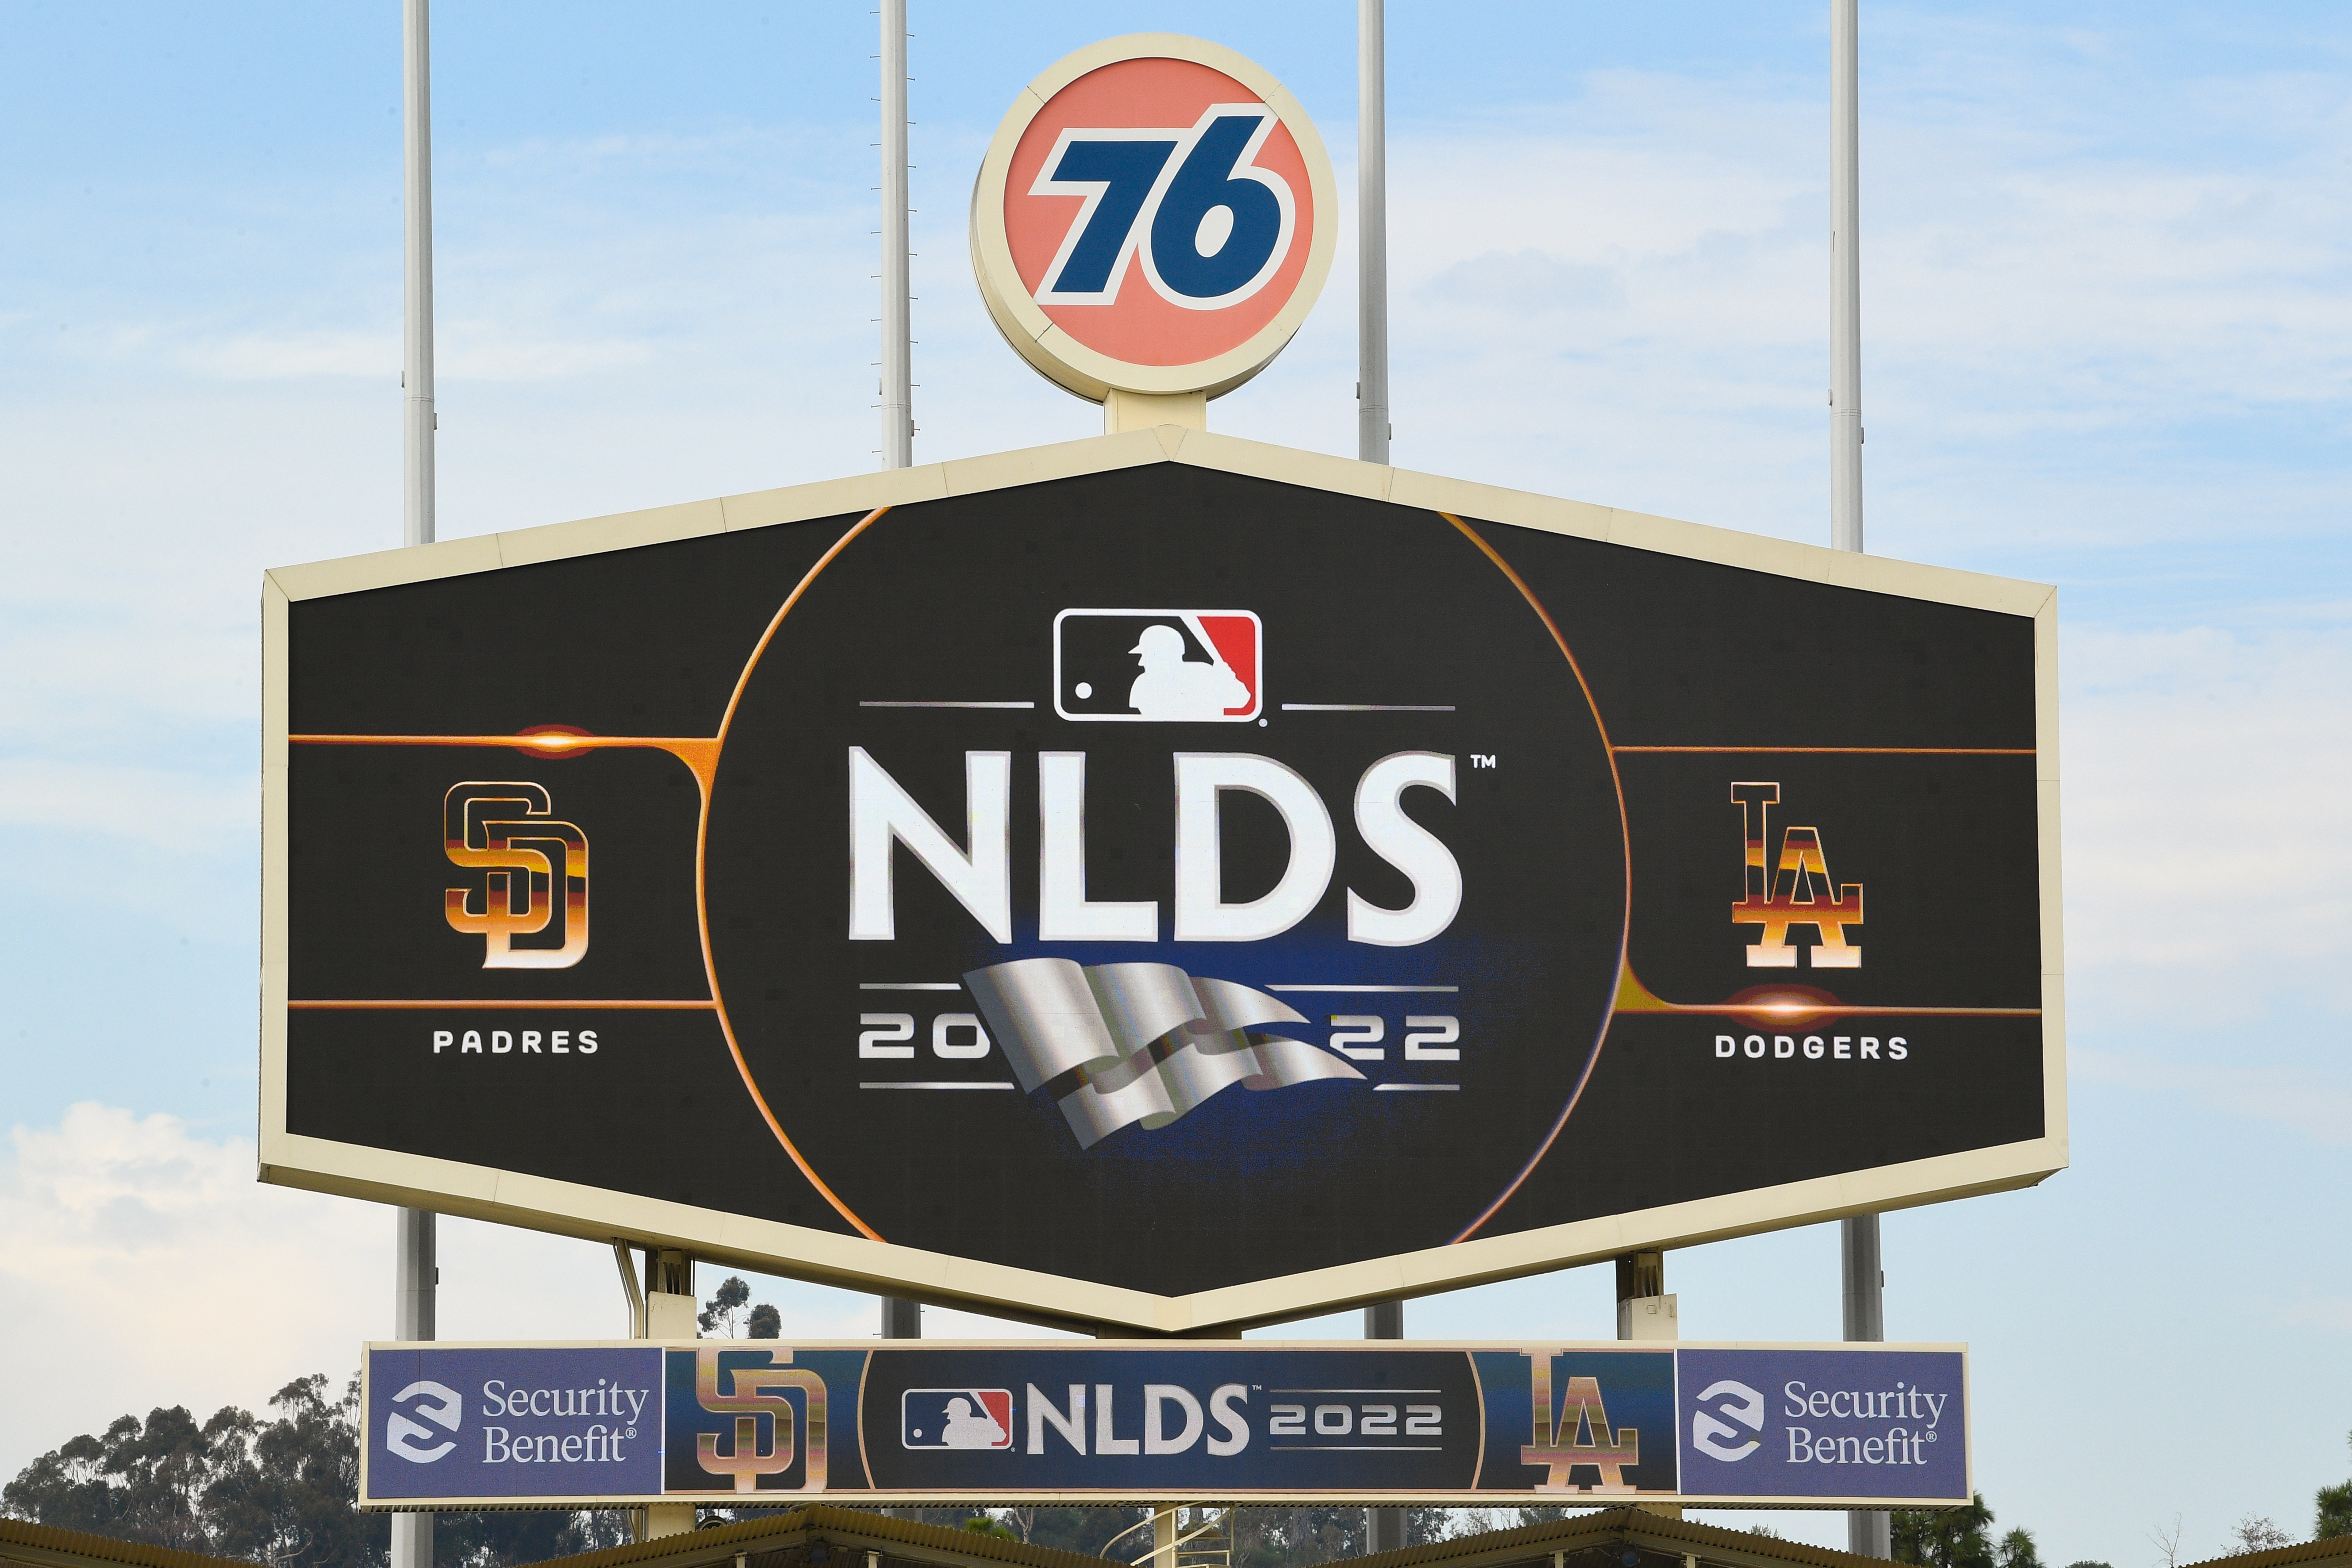 MLB: OCT 11 NLDS Padres at Dodgers